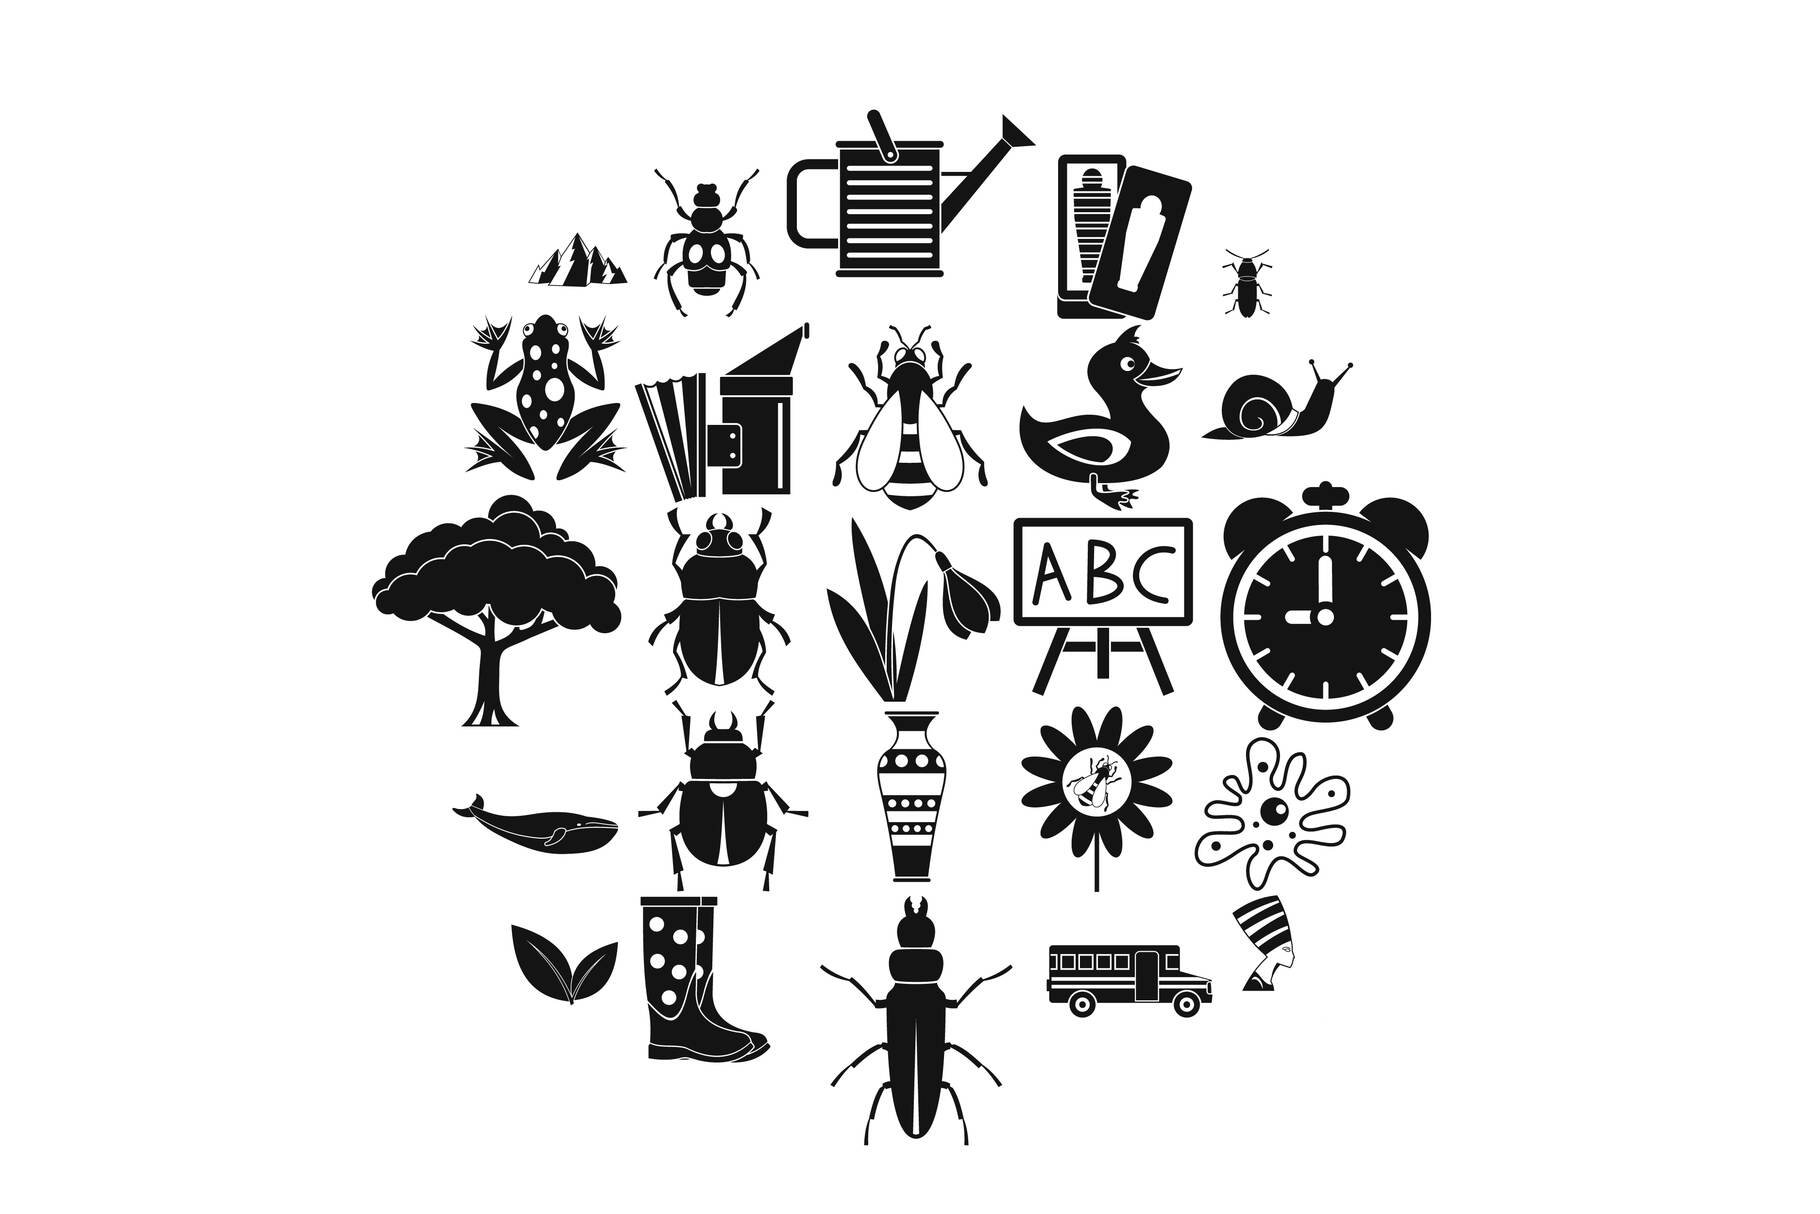 Bedbug icons set, simple style cover image.